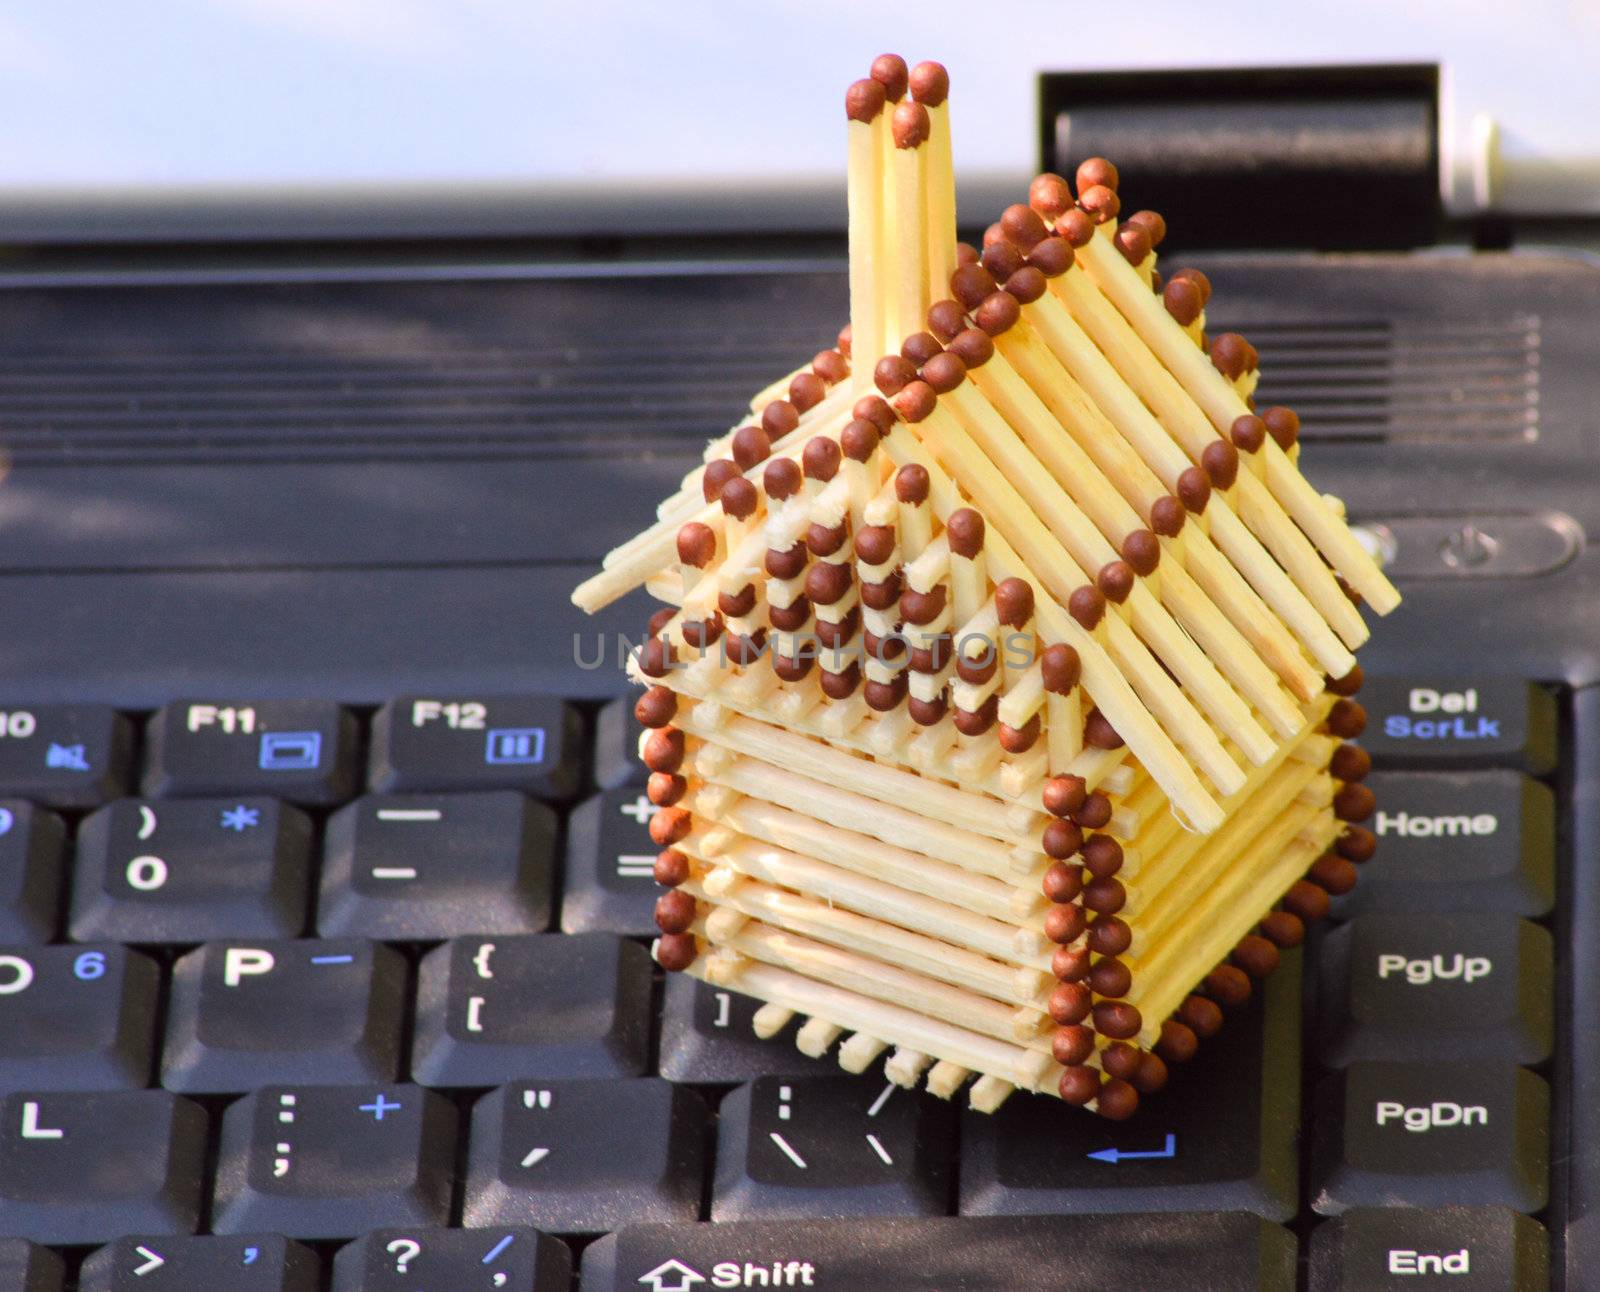 The match small house standing on the keyboard of the laptop